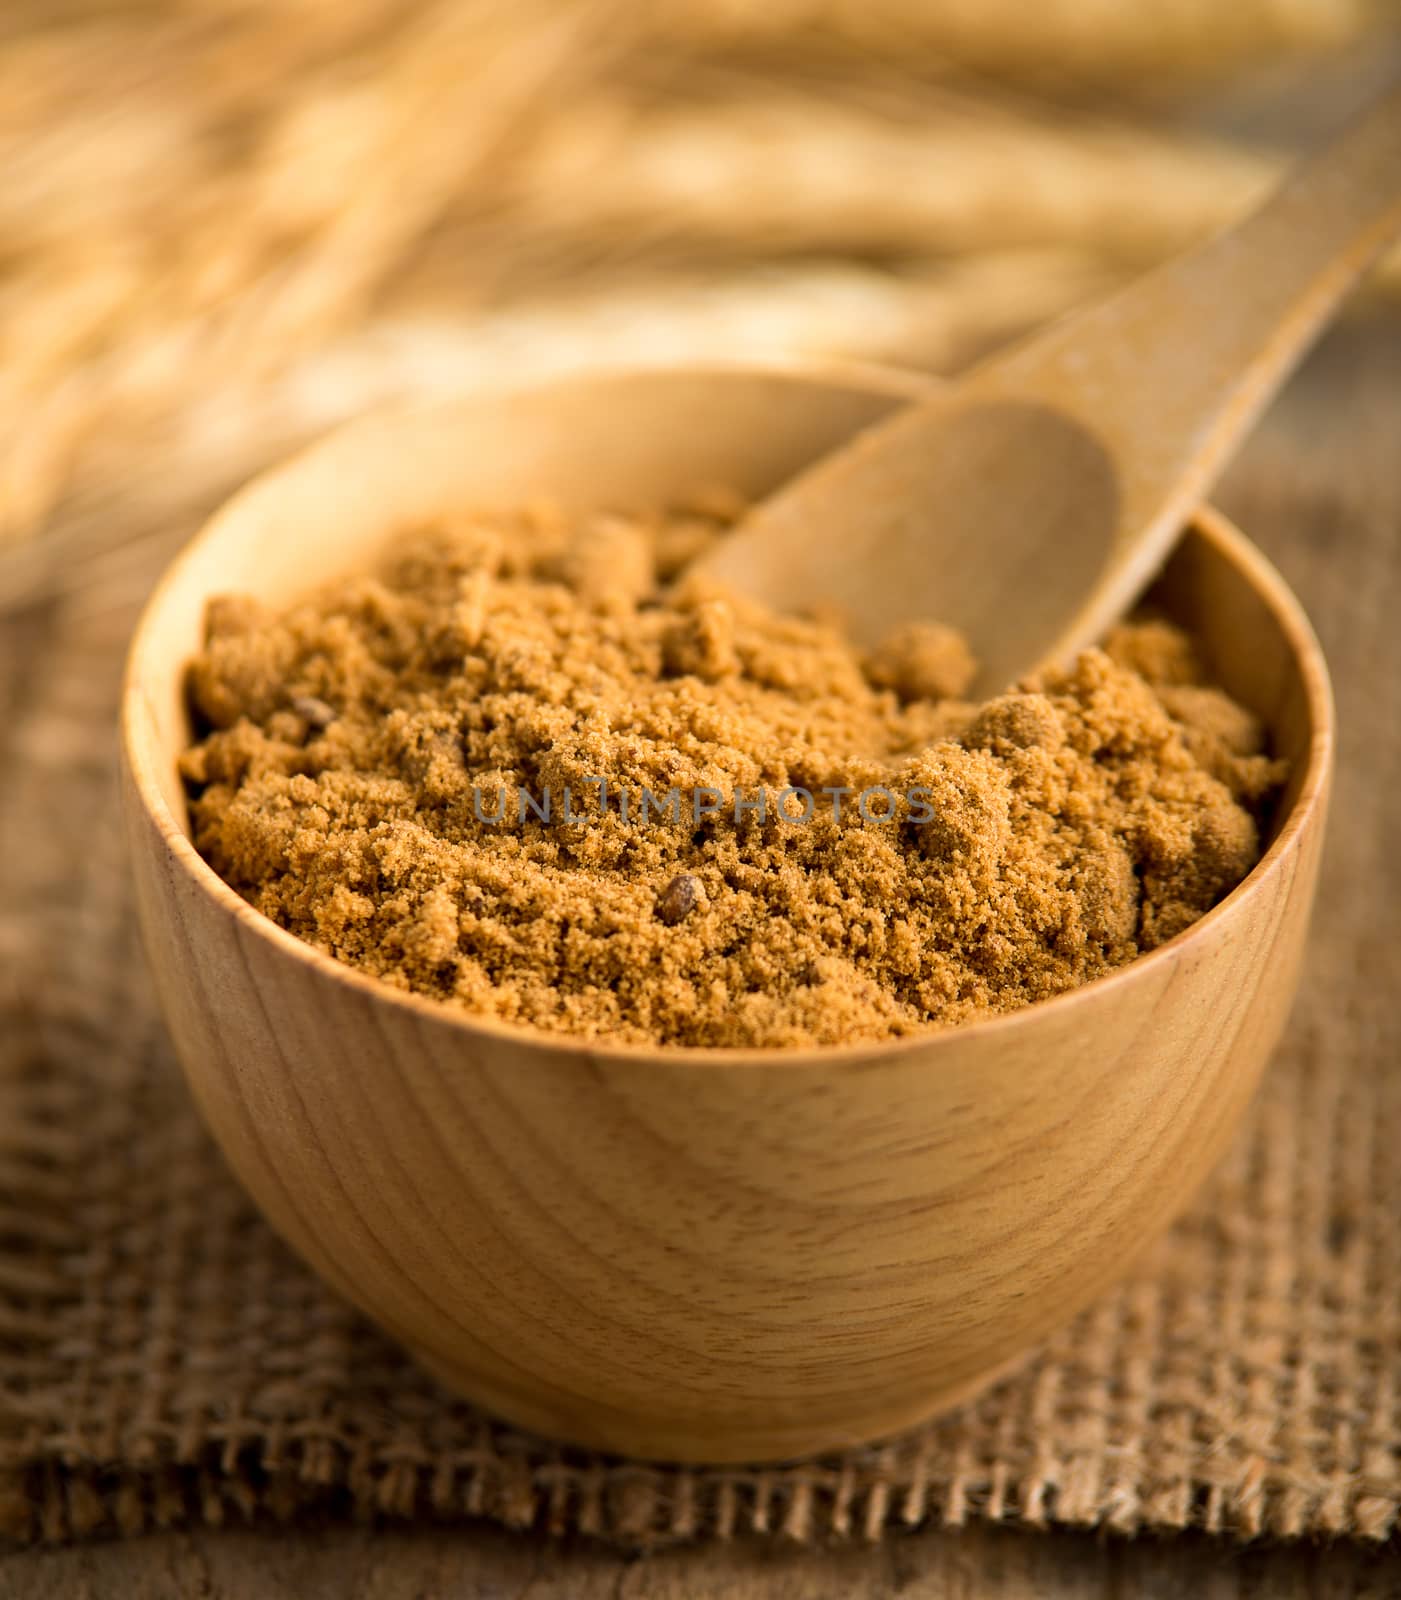 coconut palm sugar against an out of focus 